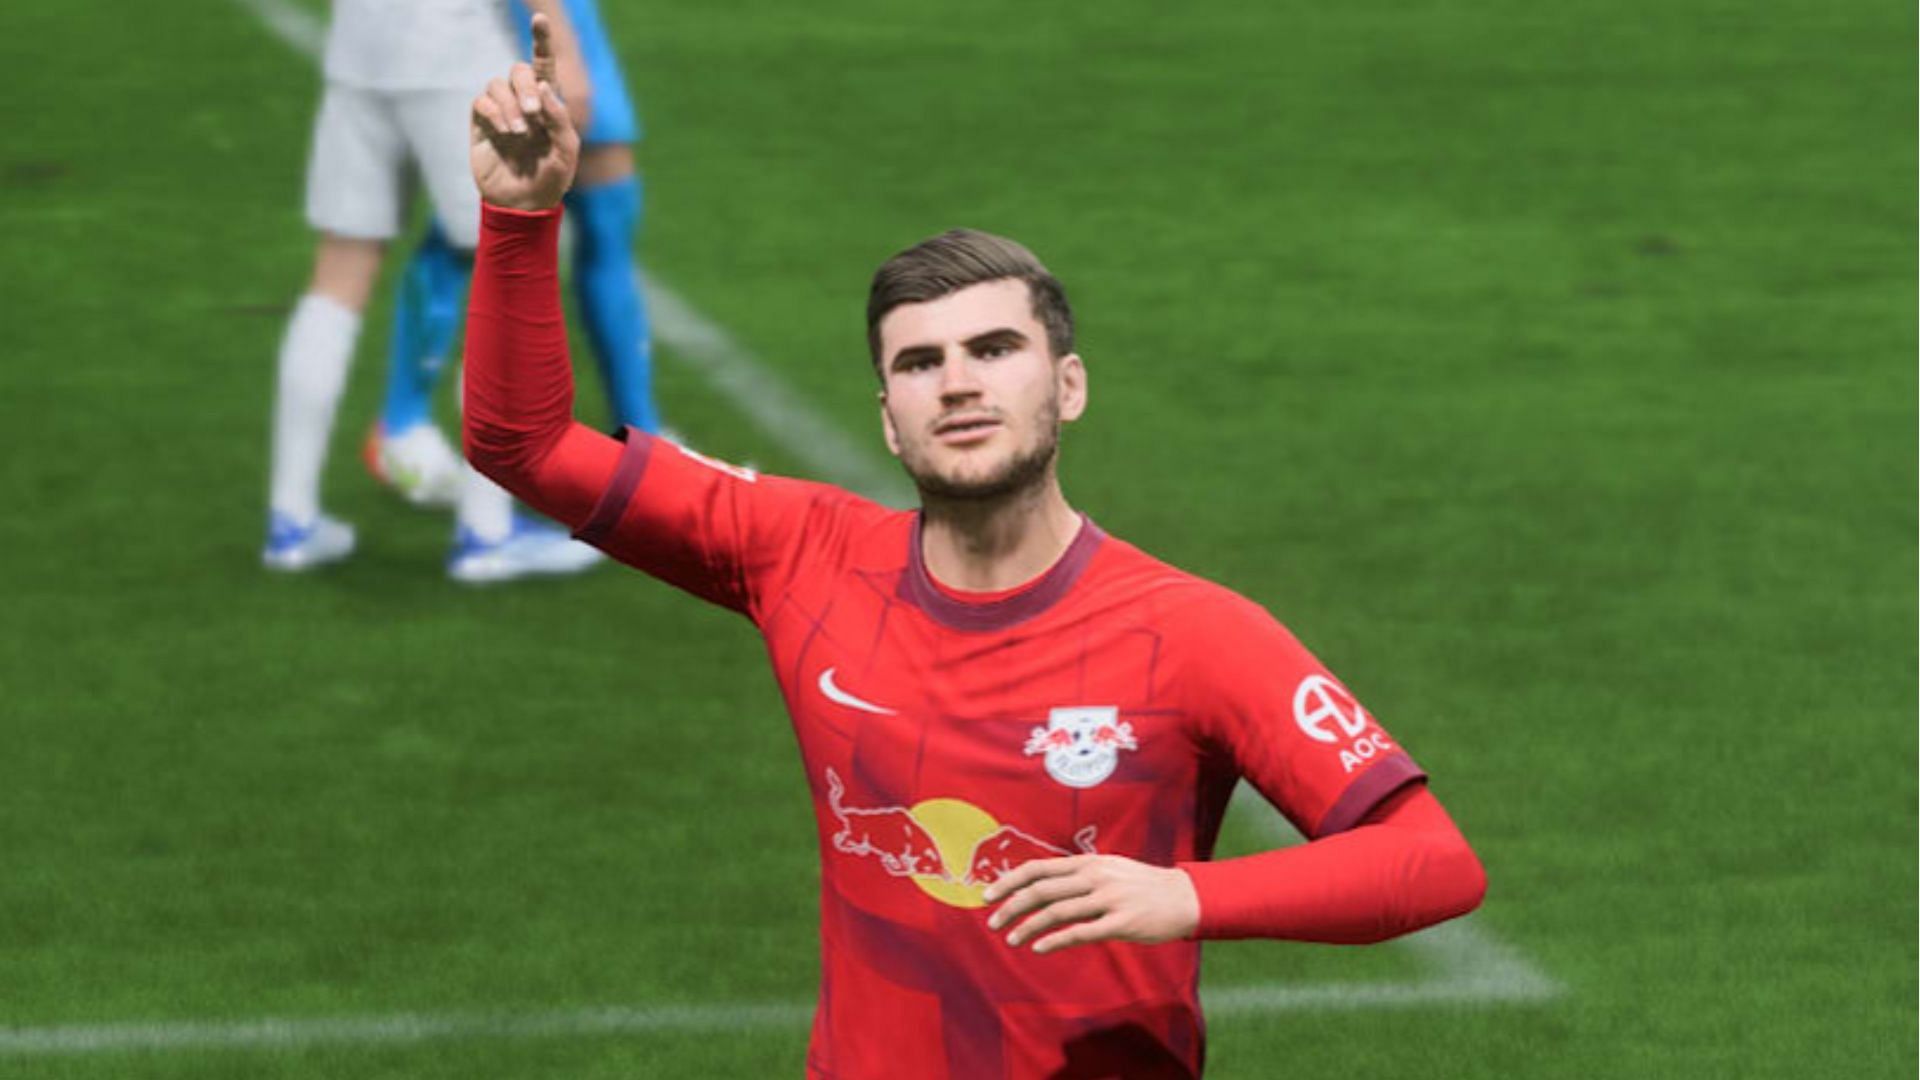 TImo Werner a Power Shot+ 